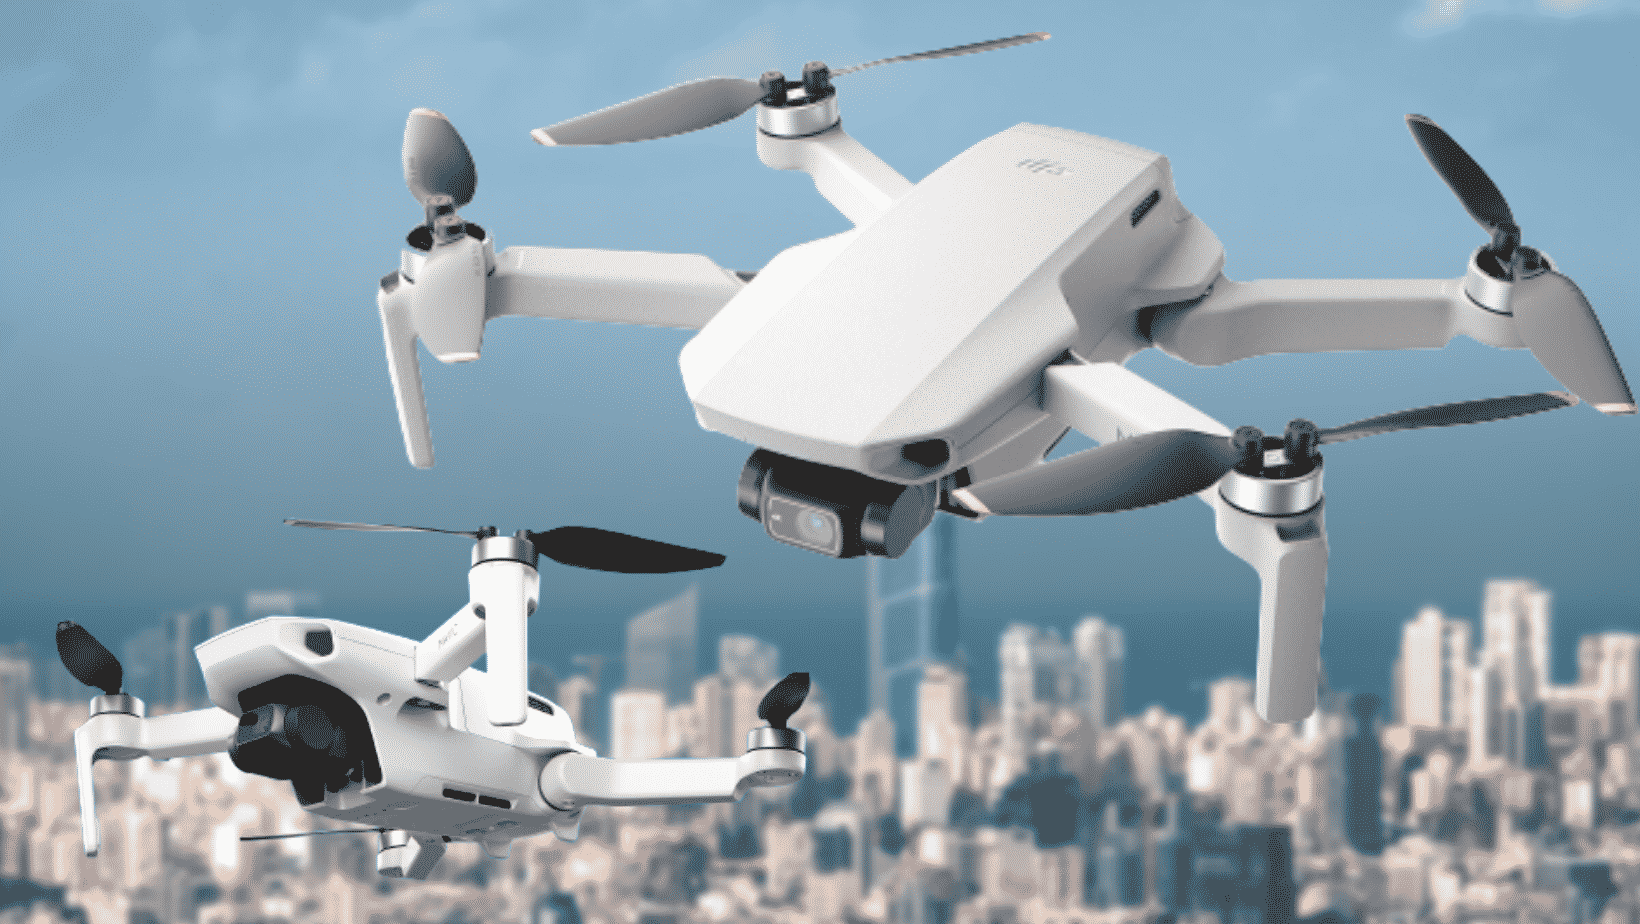 Top 5 Best Affordable Budget Drones 2021